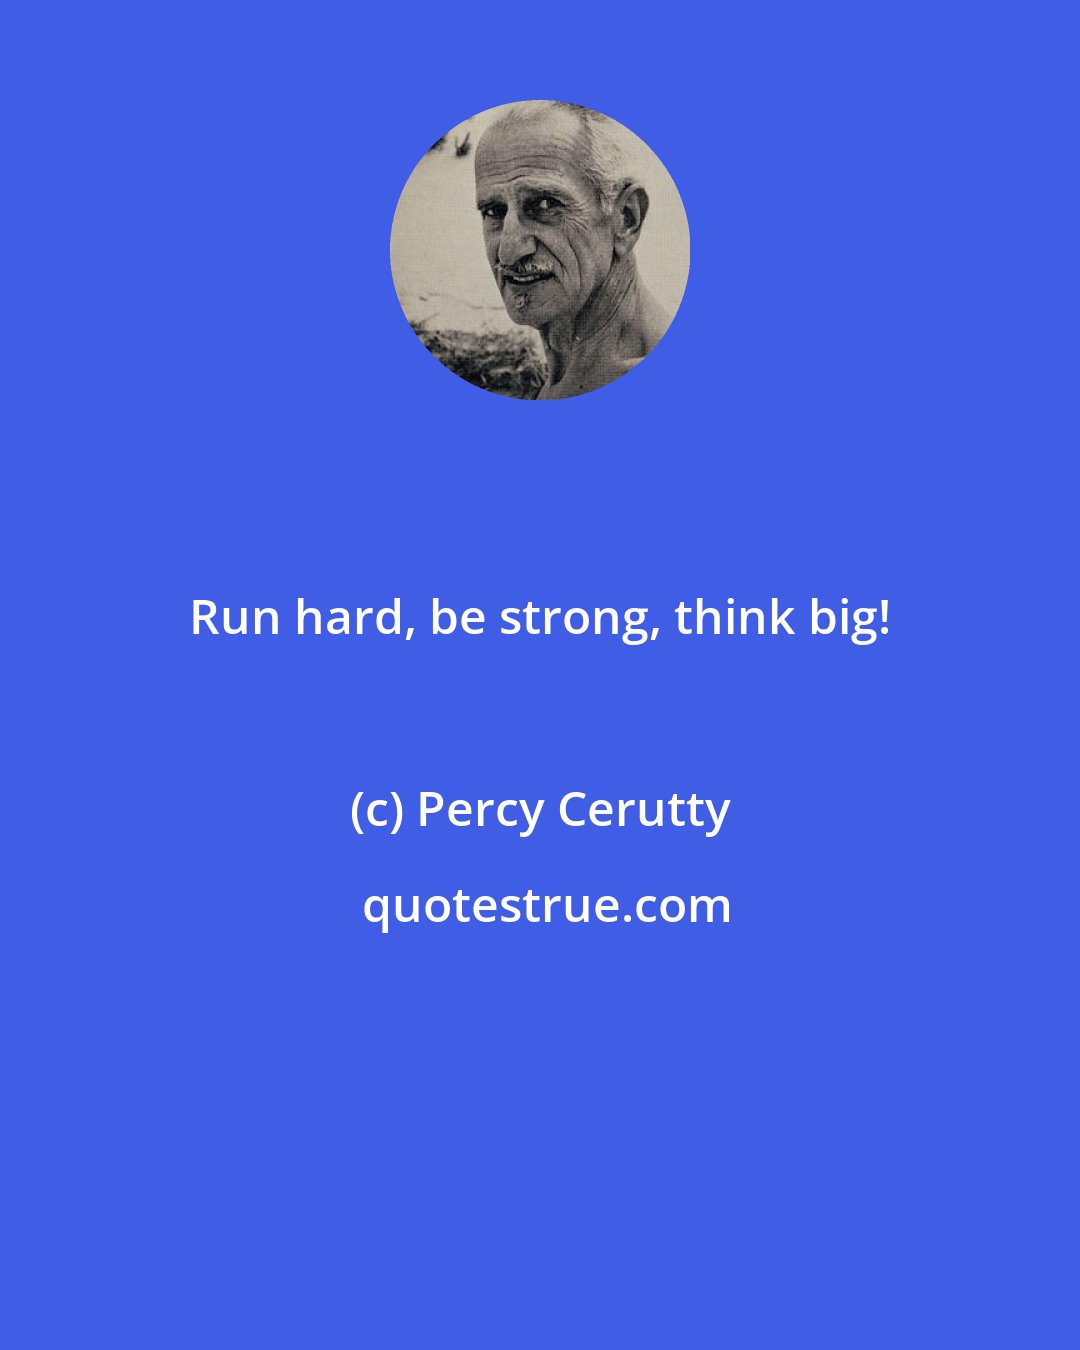 Percy Cerutty: Run hard, be strong, think big!